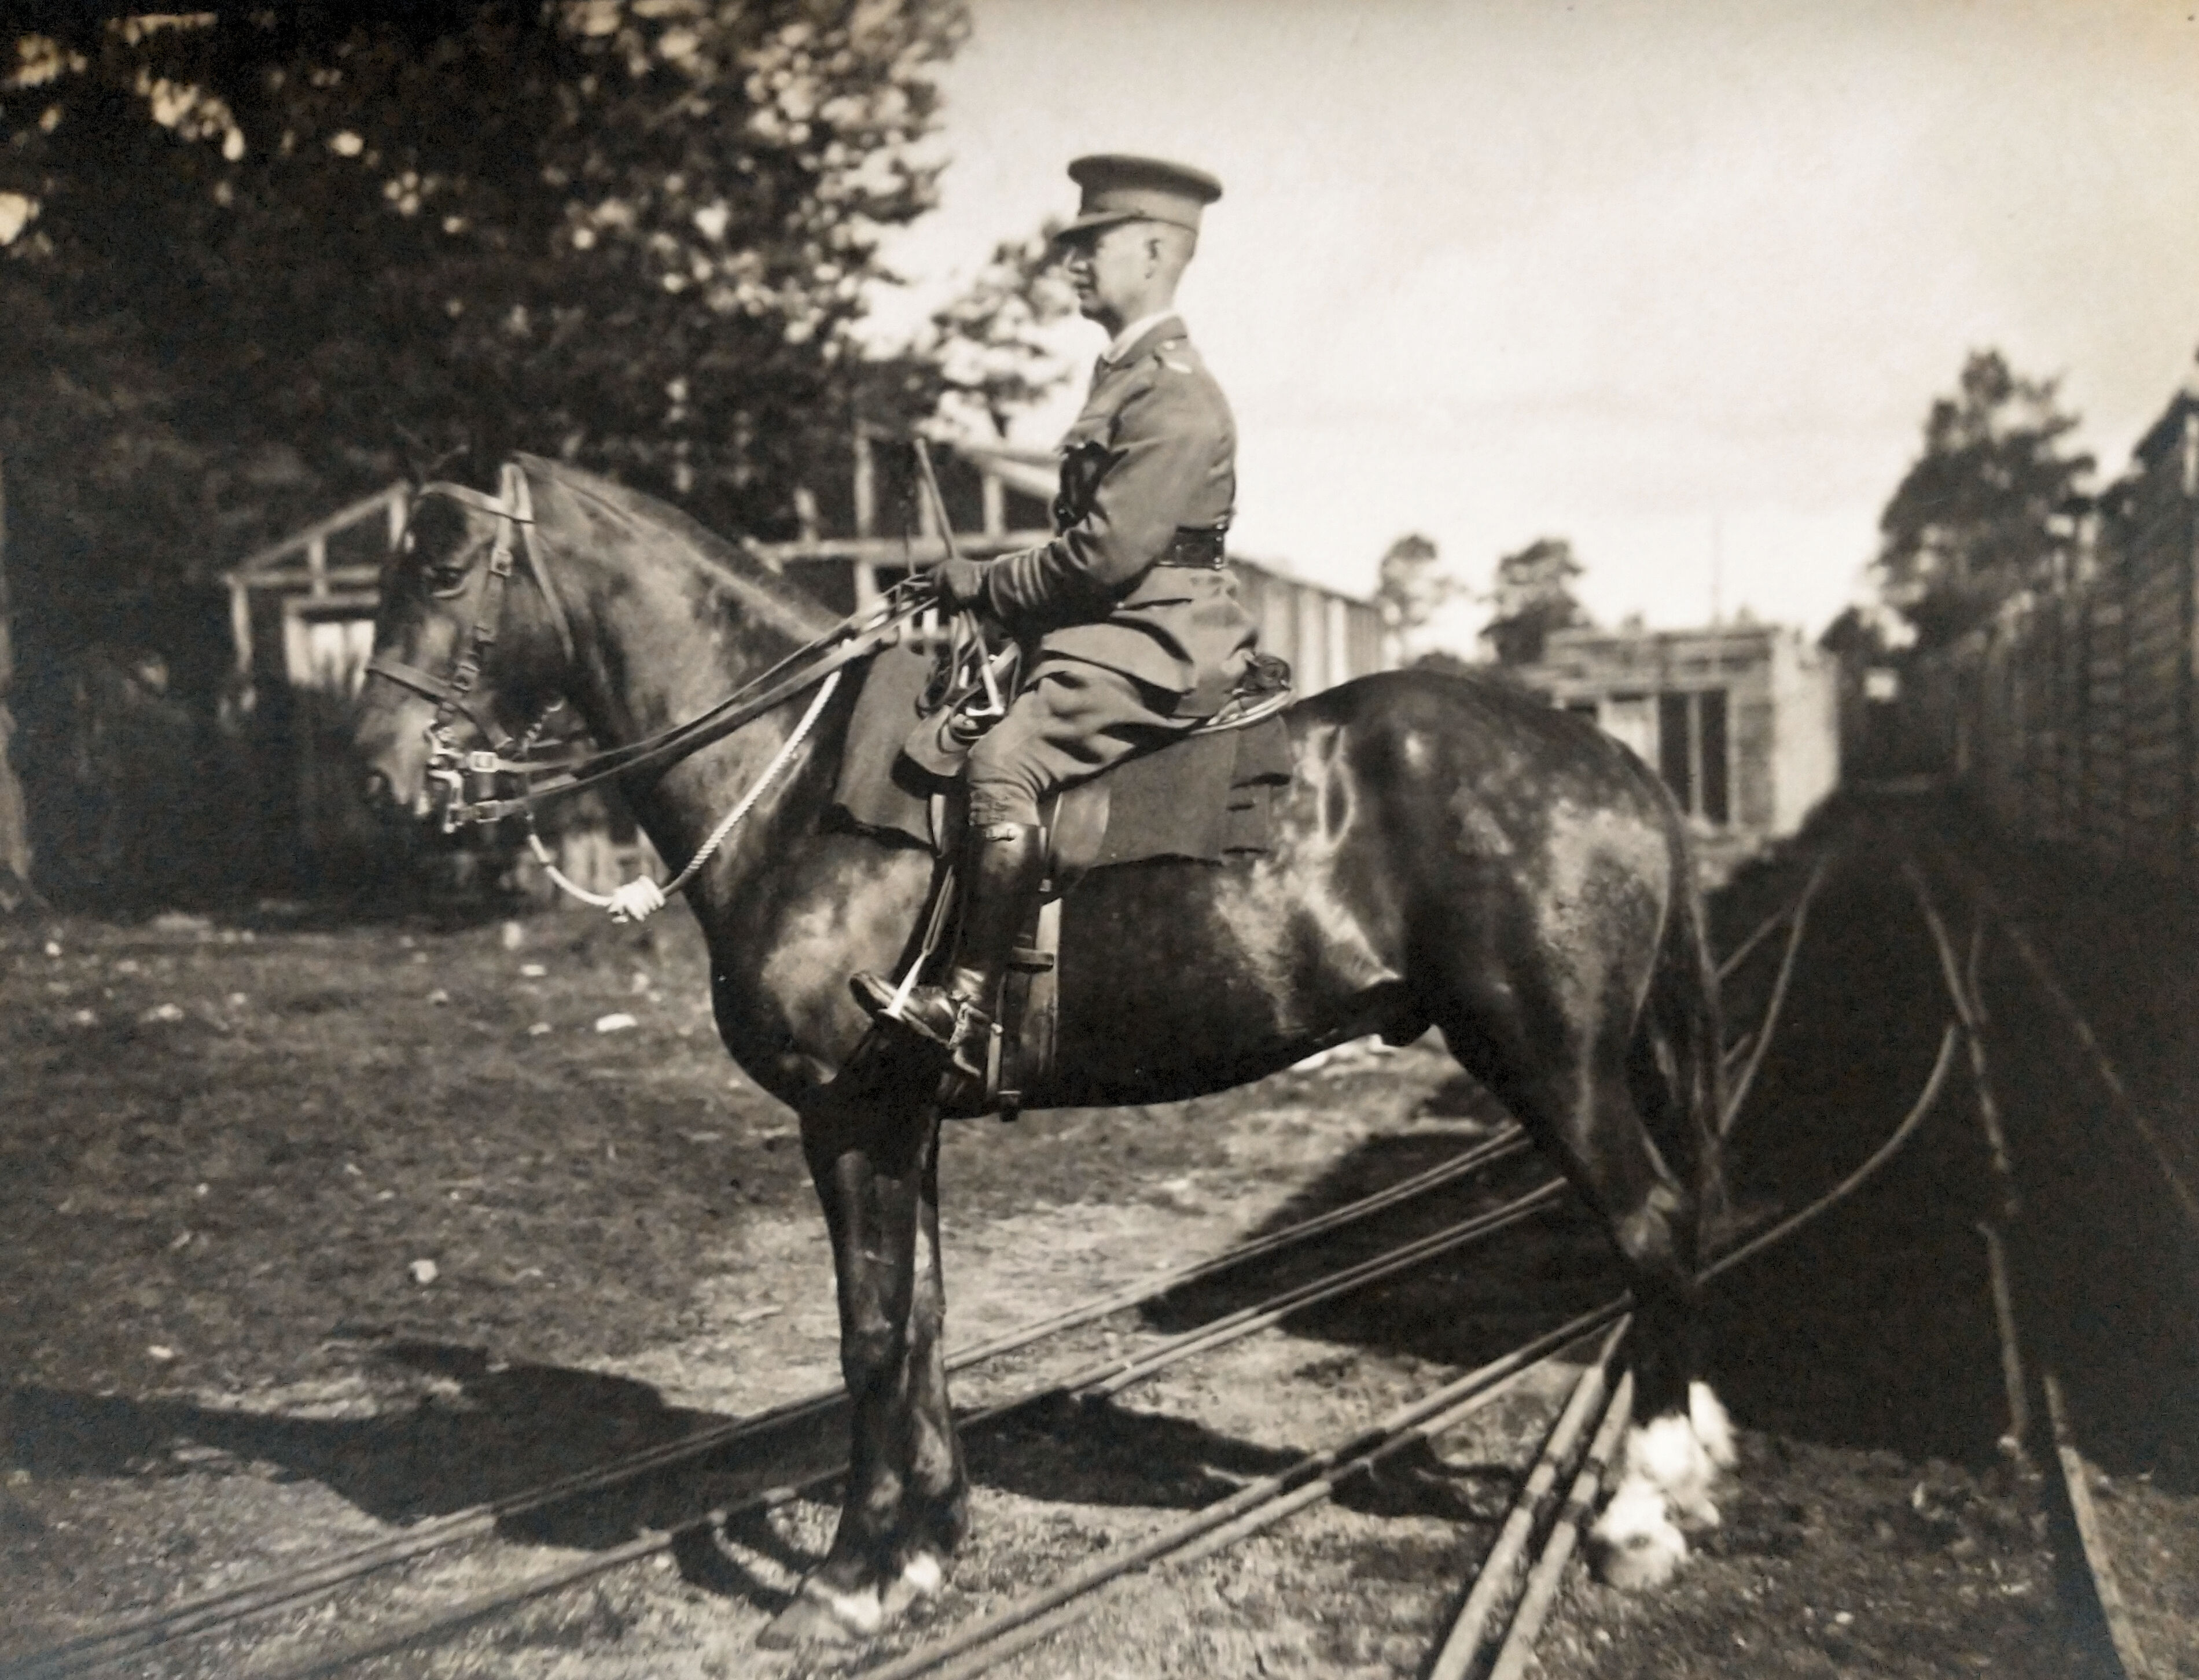 Nethy Bridge, Scotland 
1918 July 30
Co. 6 - C.F.C (Canadian Forest Corp)
Major H.A. Calder 
with the Horse Kipper 

***Nethy Bridge is a small village in Strathspey in the Highland council area of Scotland***
(source: Wikipedia)
